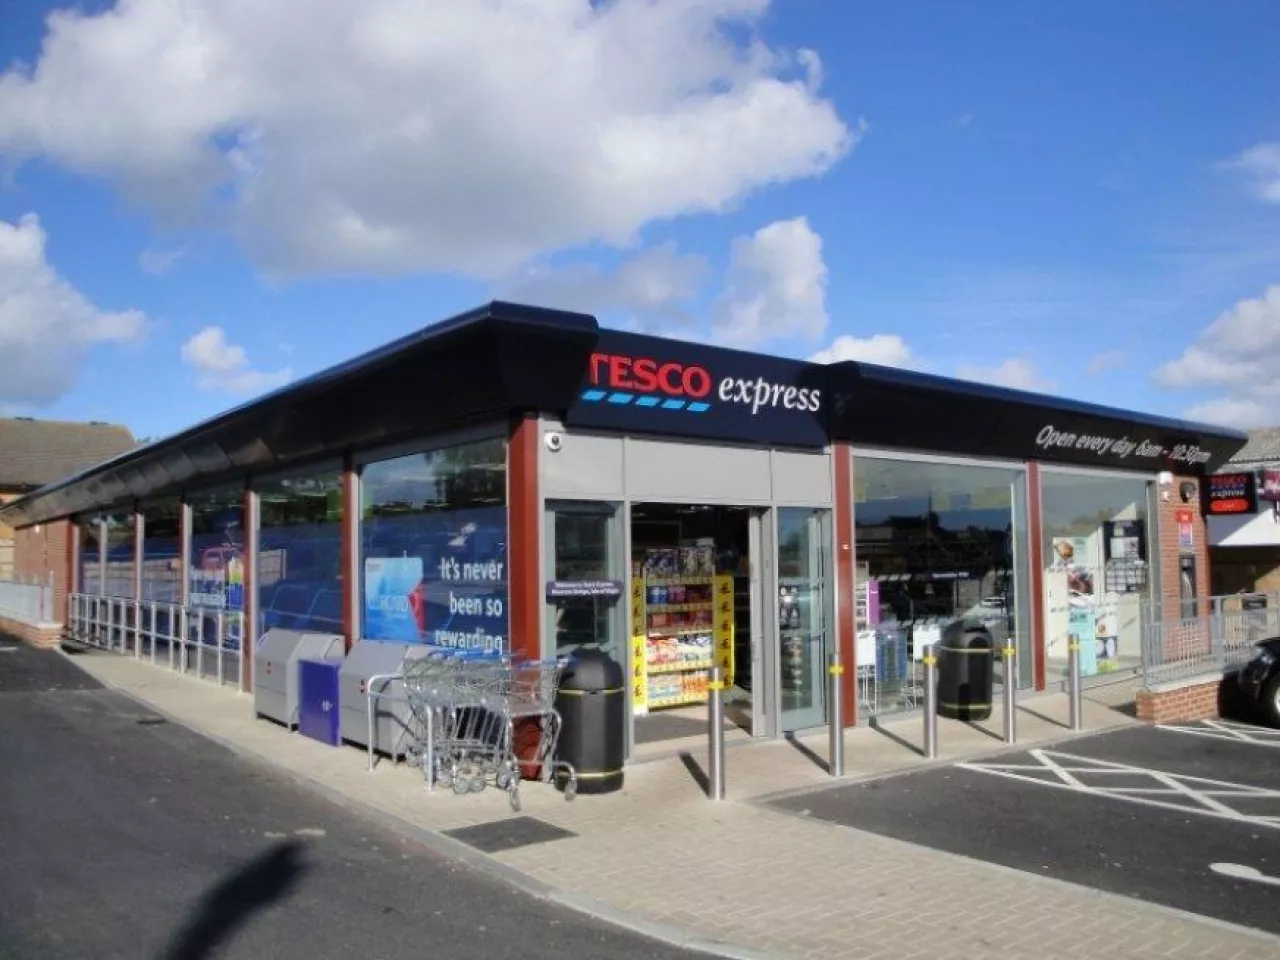 Tesco Express w Wootton, WB (fot. By Editor5807 (Own work) [CC BY 3.0])